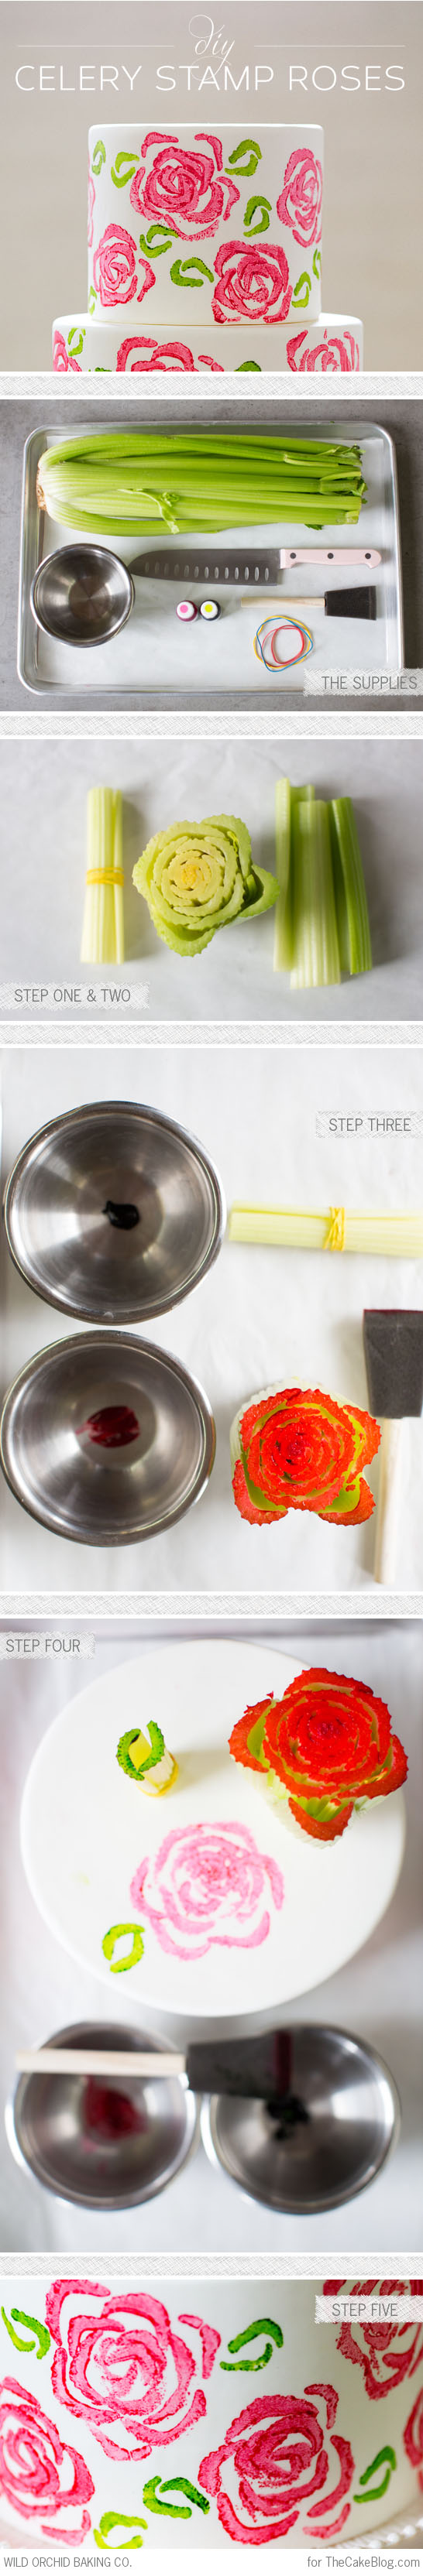 DIY Celery Stamp Rose Cake by Wild Orchid Baking Co  |  TheCakeBlog.com